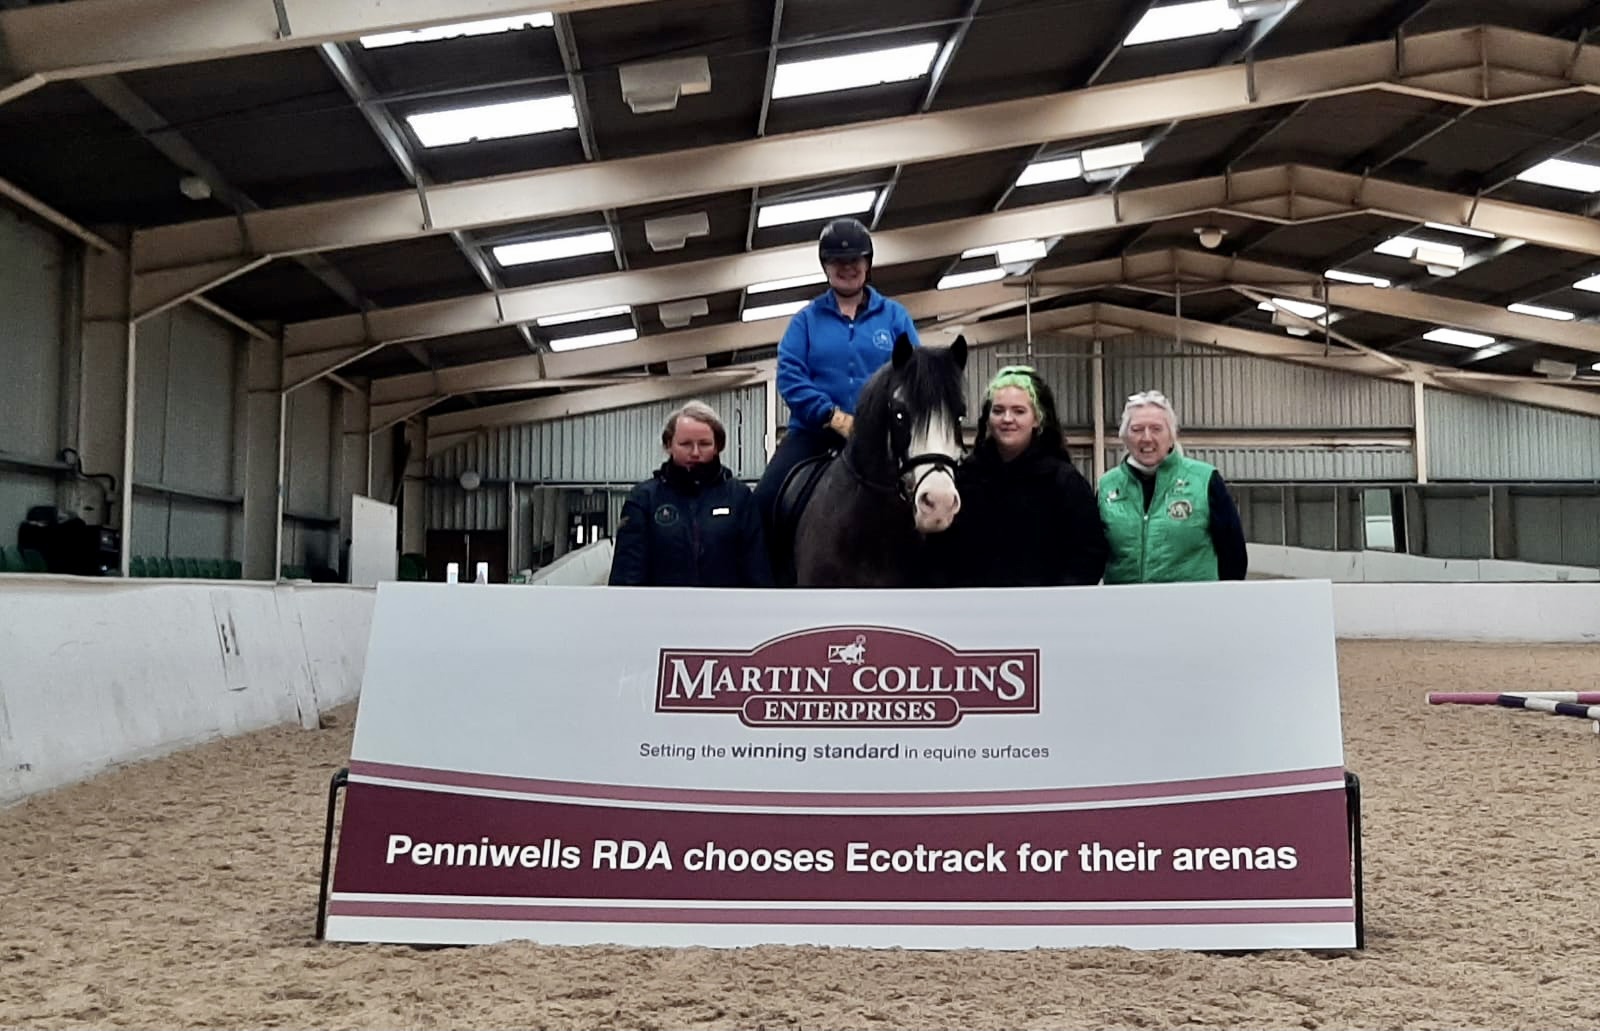 Martin Collins offer support to Penniwells RDA